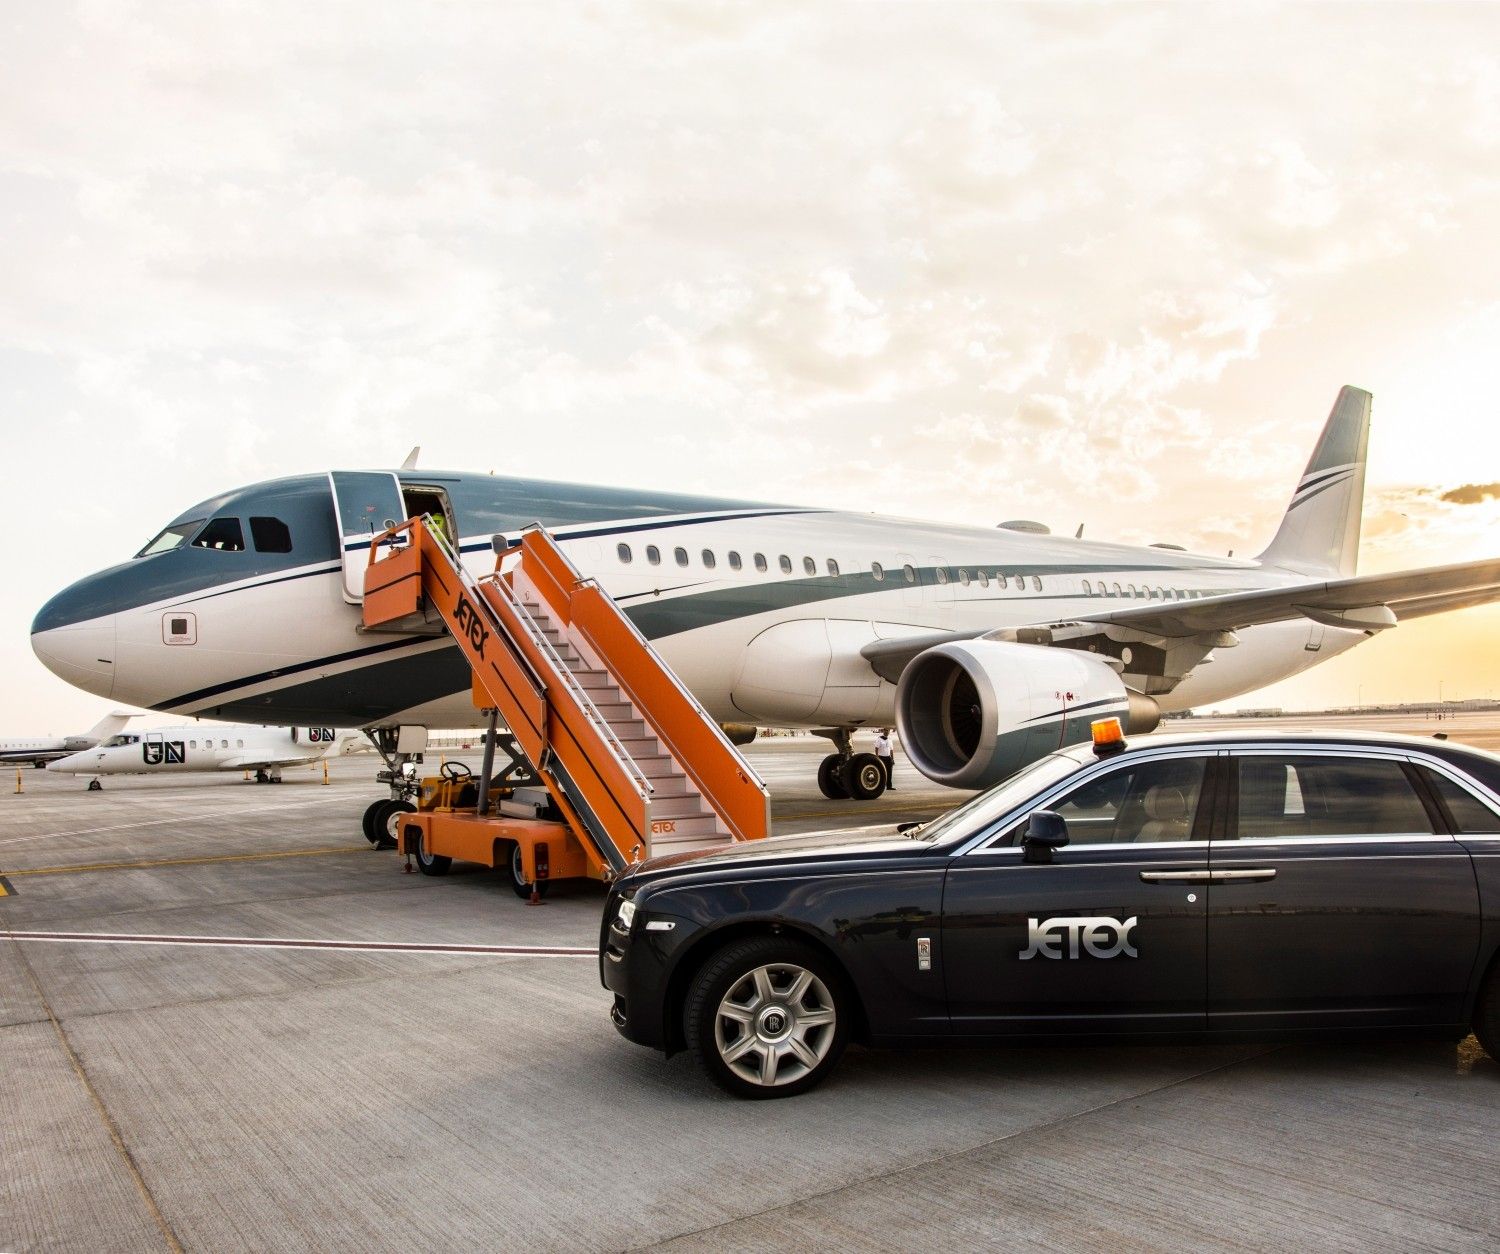 A Jetex vehicle bringing passengers to a large private jet.